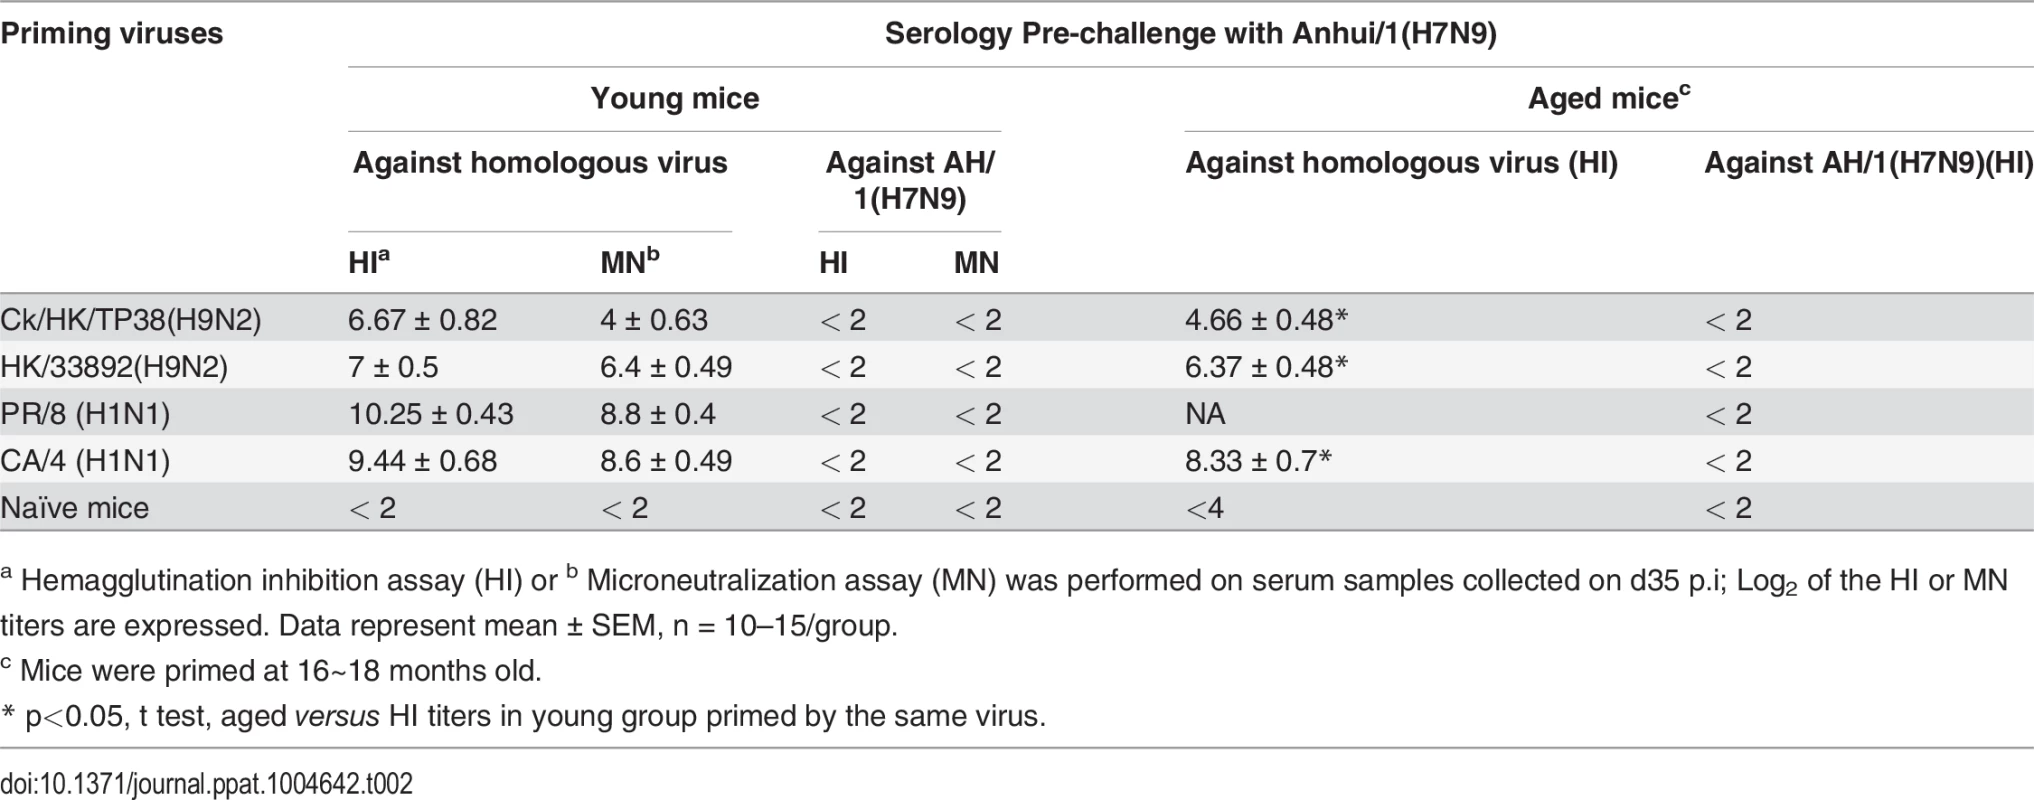 Serologic testing of mice primed with different viruses.